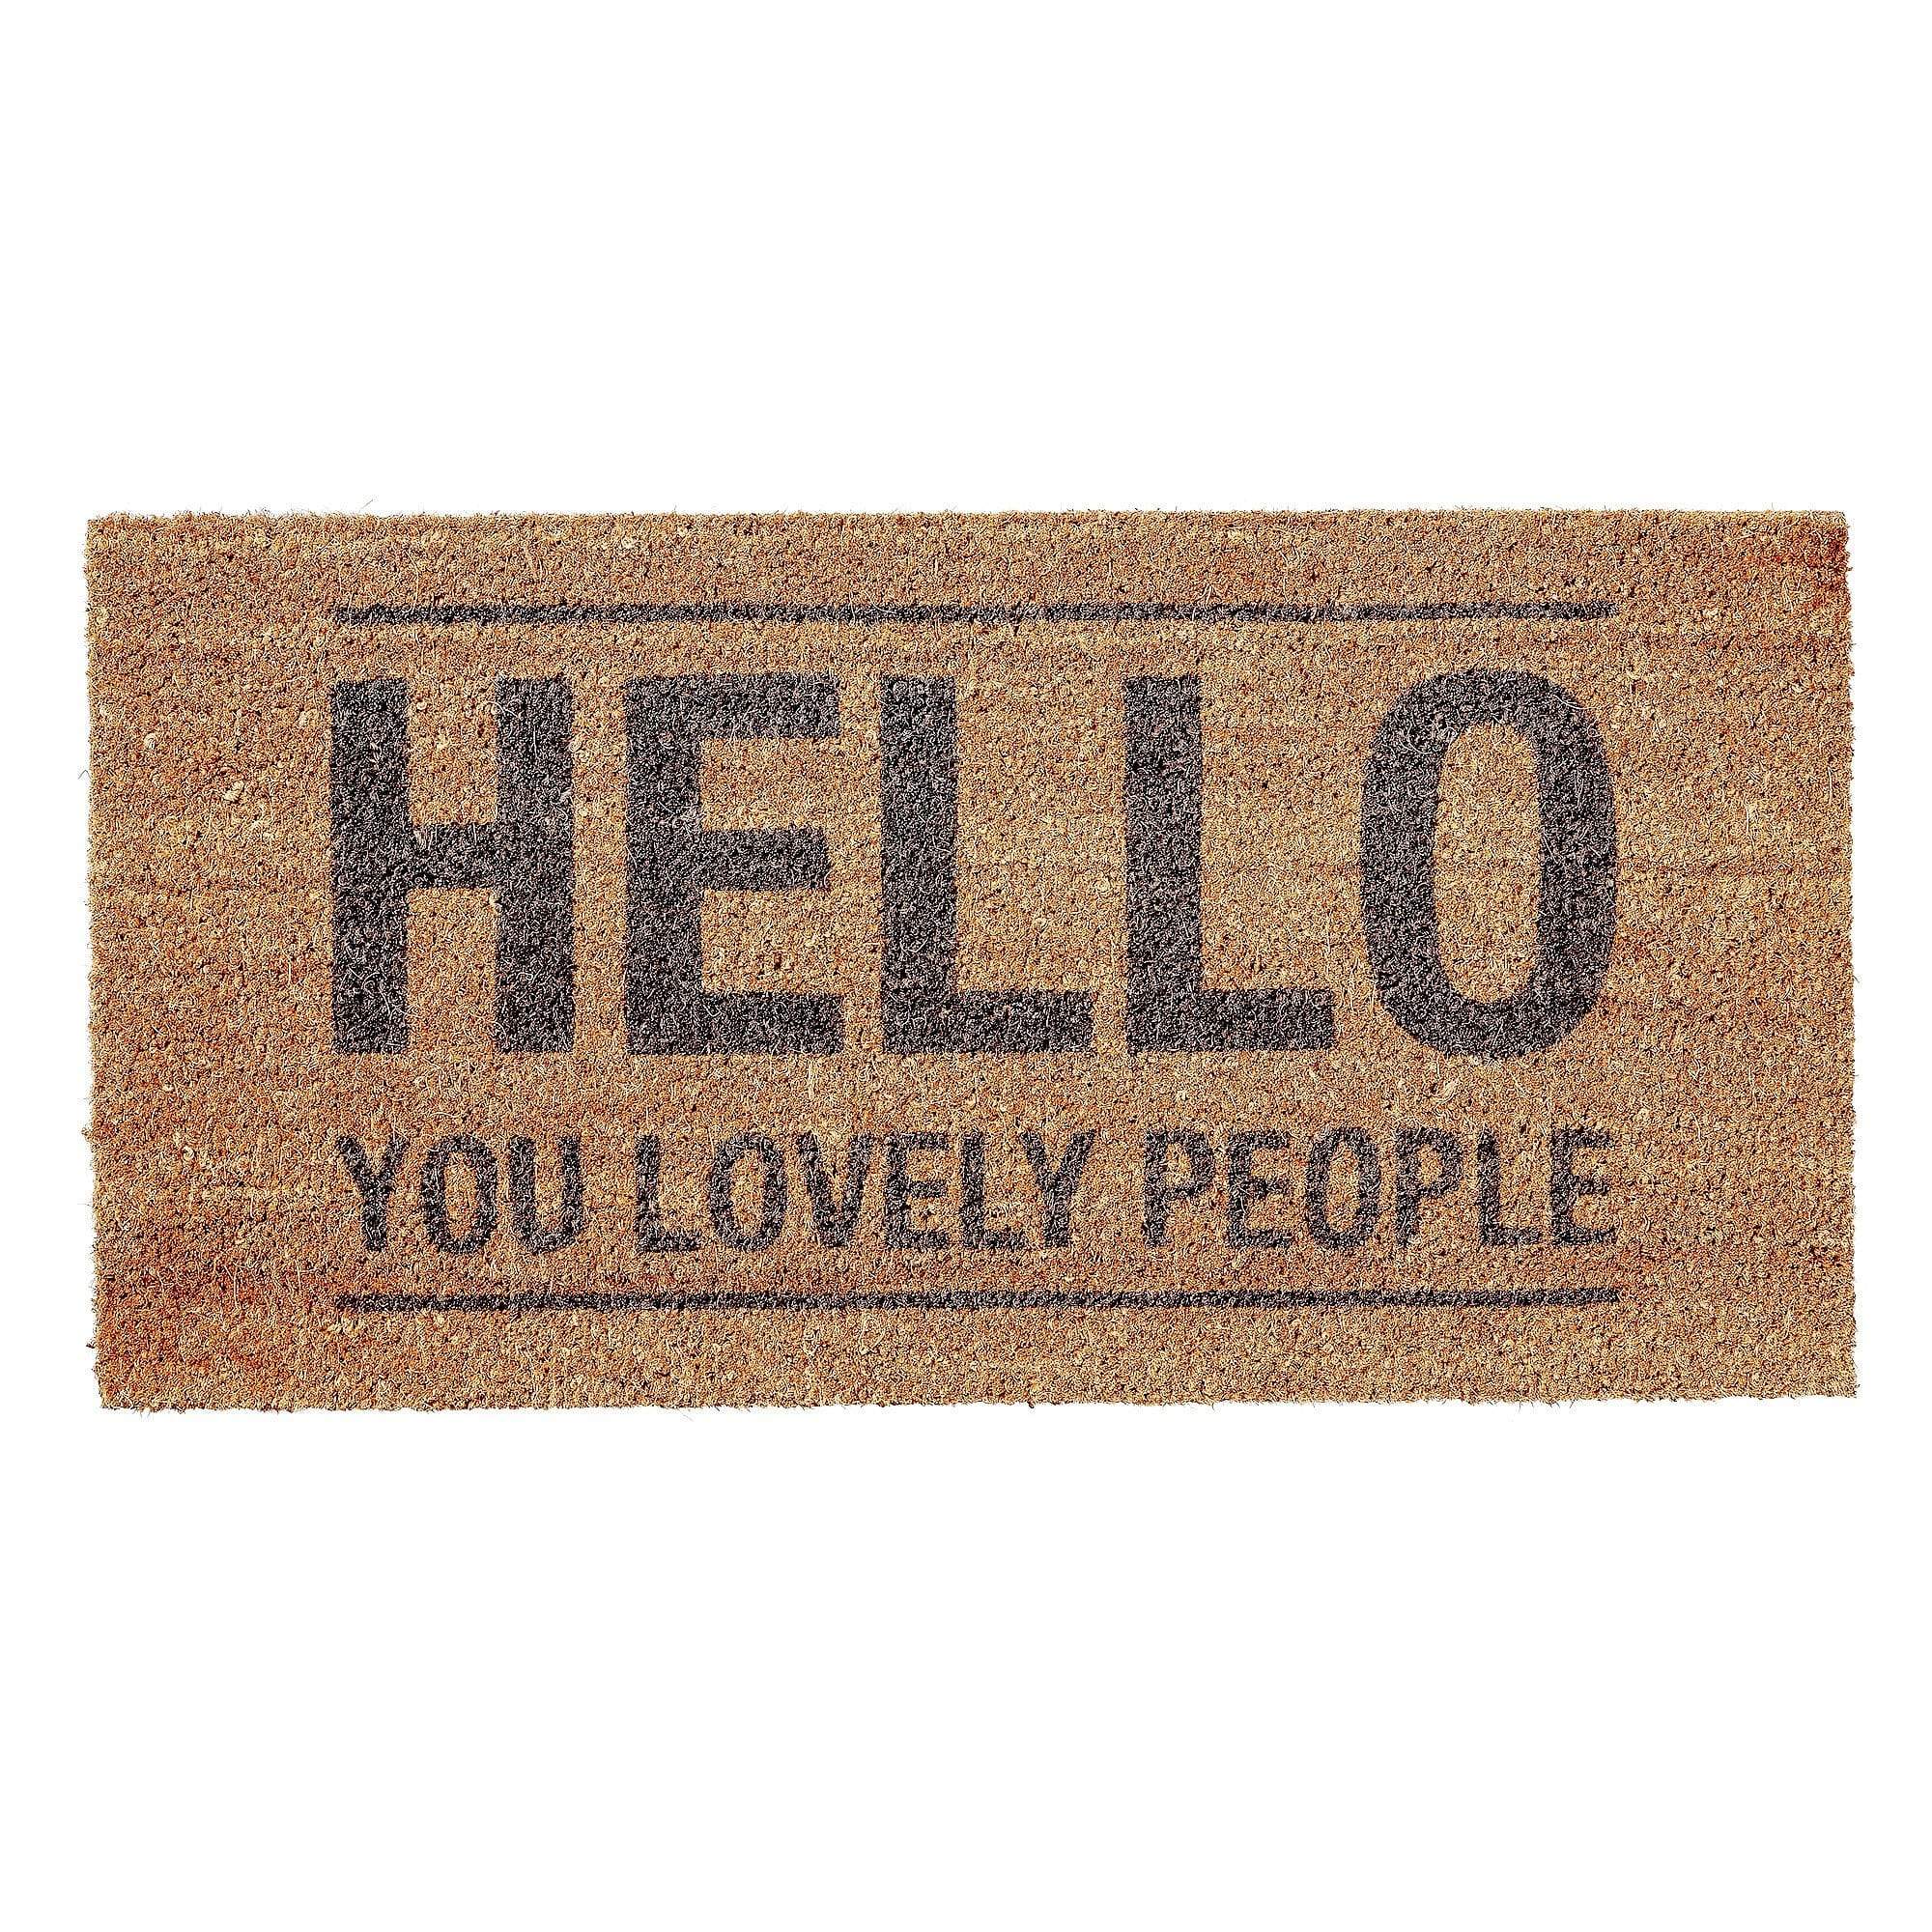 Large Hello Lovely People Doormat